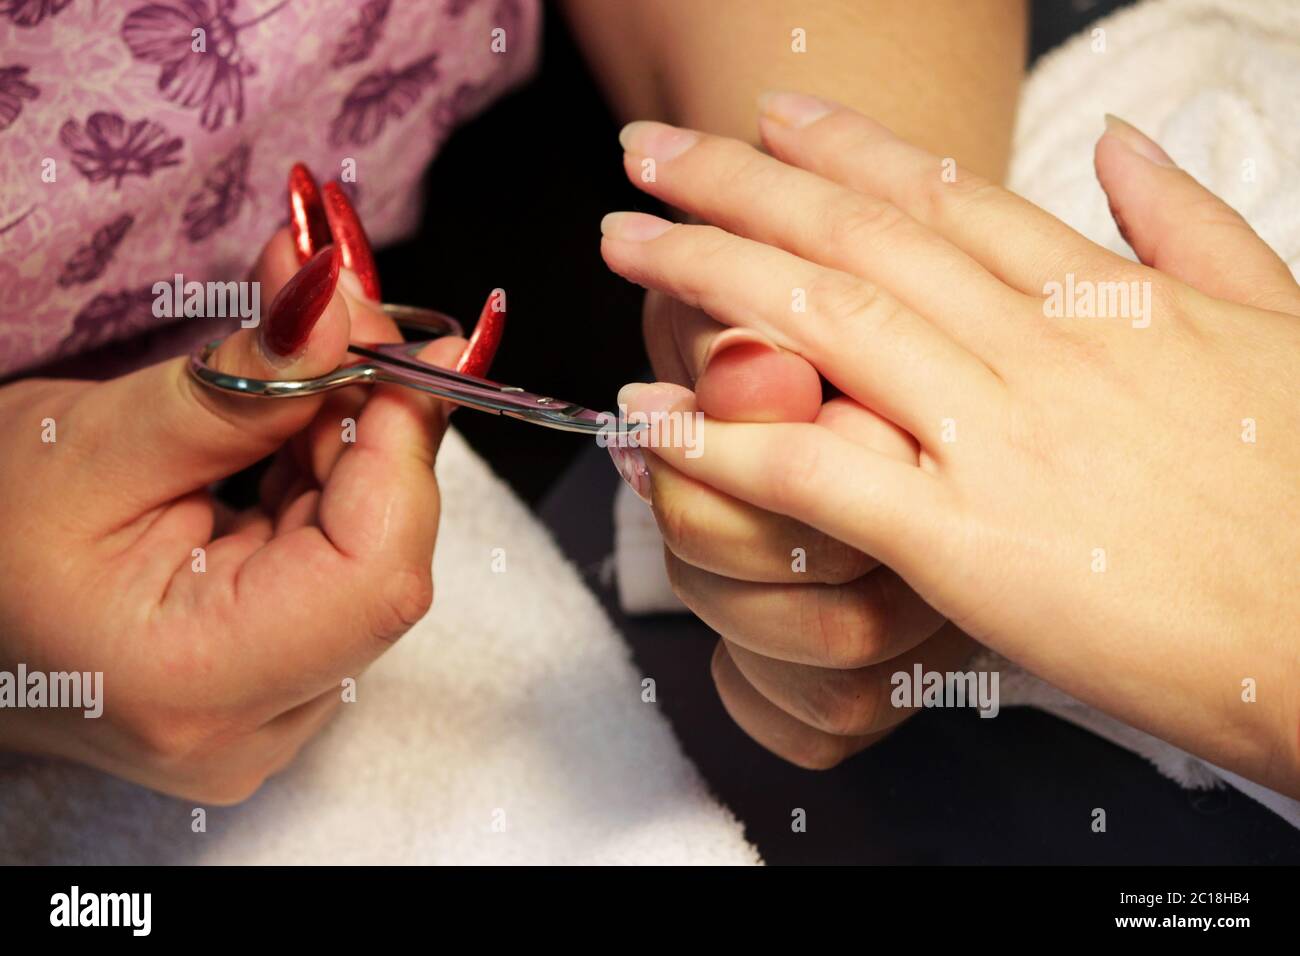 manicurist at the training courses of a manicure prepares the hand of a lady client with a manicure scissors for cuticles before Stock Photo